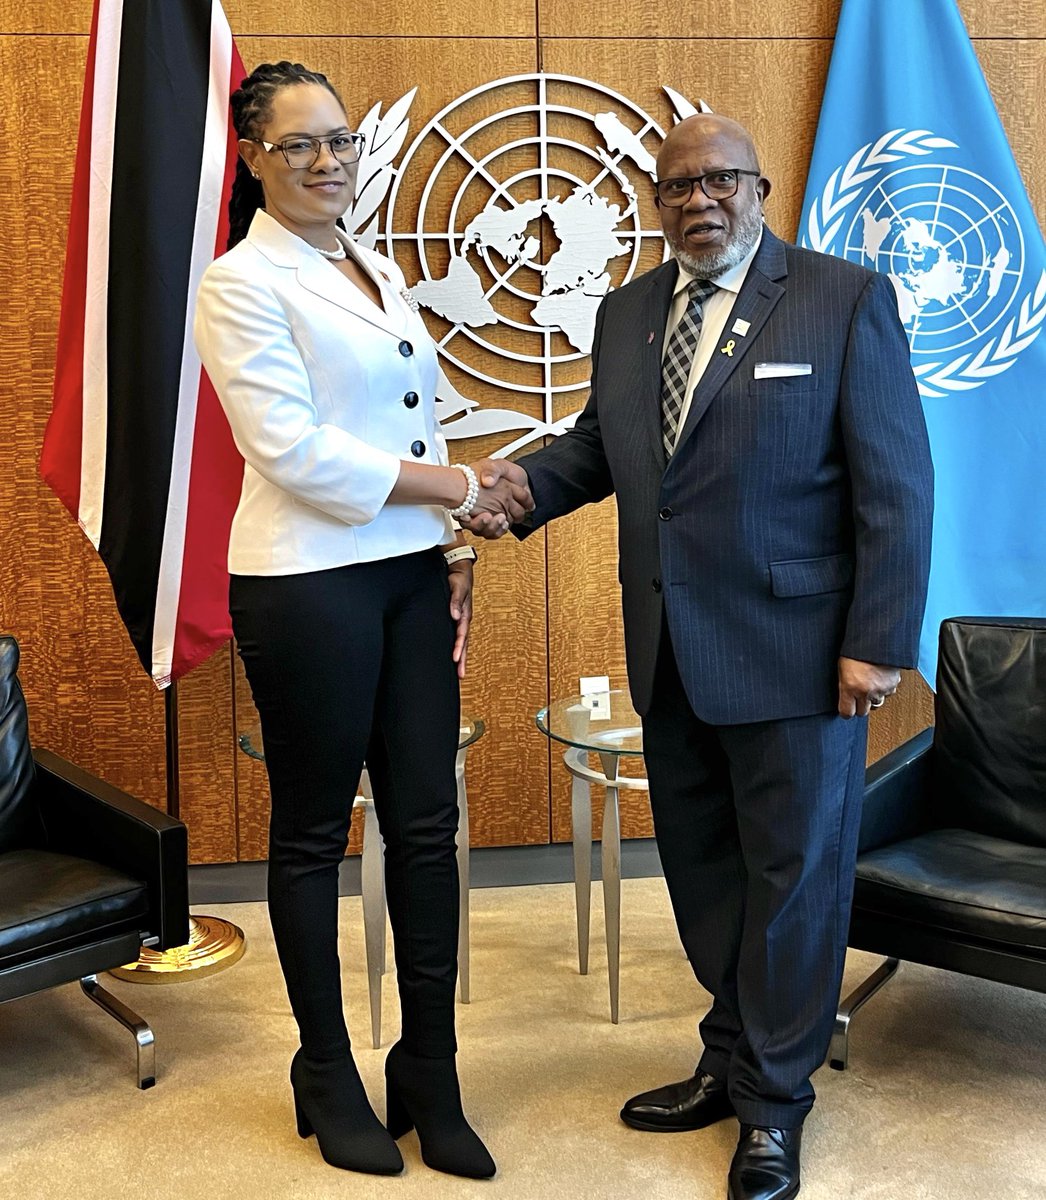 Delighted to meet H.E. Ayanna Webster Roy, Minister in the Office of the Prime Minister of Trinidad and Tobago responsible for Gender and Child Affairs. Commend 🇹🇹's priorities on gender equality, incl. the development of a national action plan for Women, Peace, and Security.